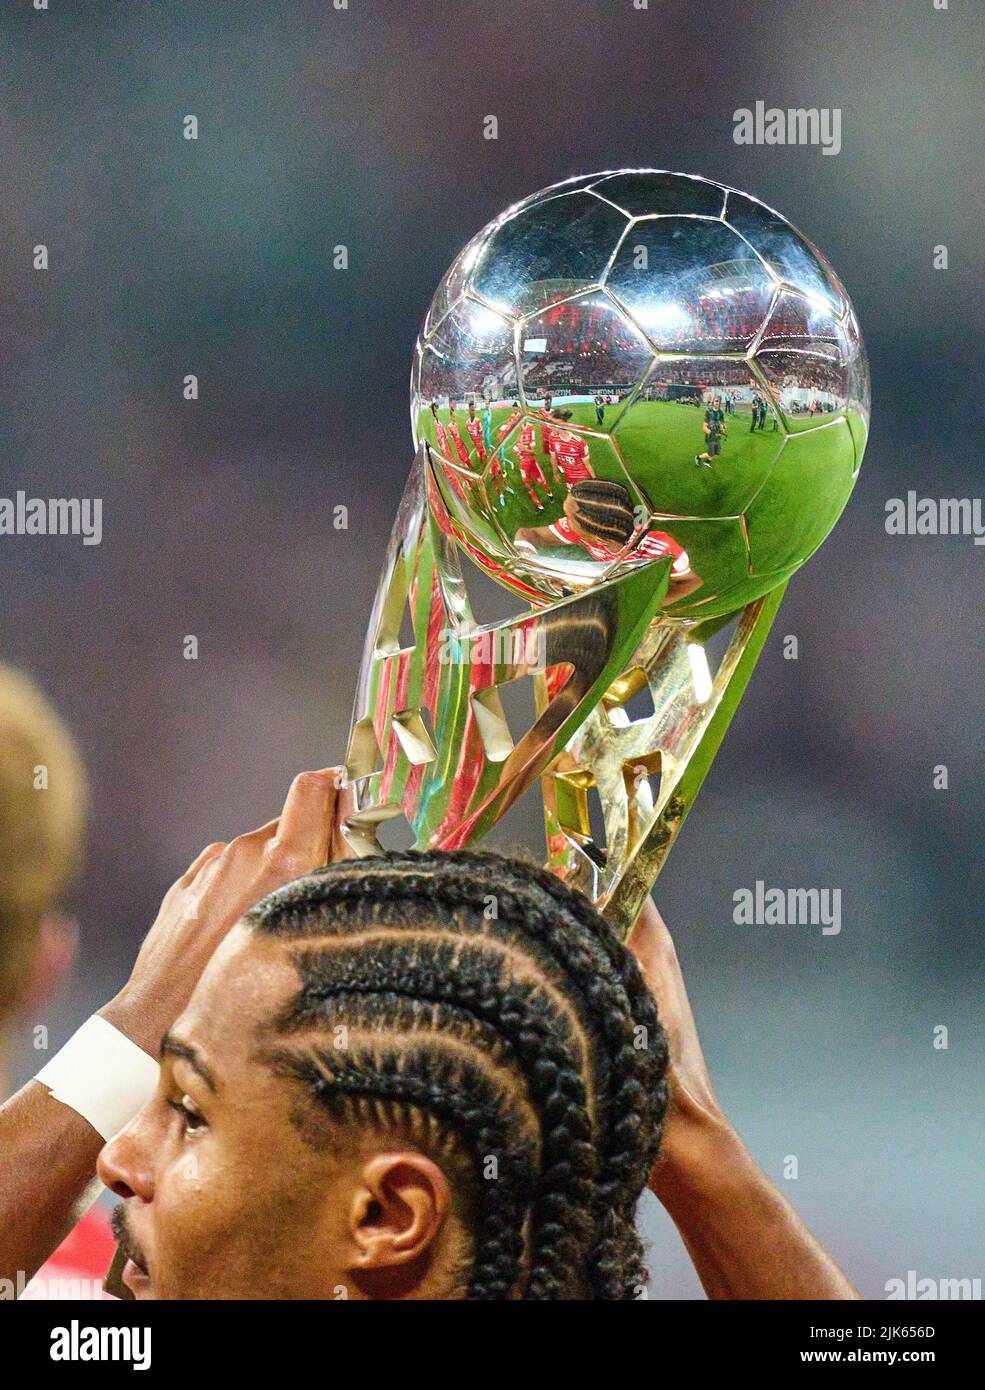 Leipzig, Germany. 30th July, 2022. Serge GNABRY, FCB 7   at winner ceremony with team mates after the match RB LEIPZIG - FC BAYERN MÜNCHEN 3-5 DFL SUPERCUP, 1. German Football League,  in Leipzig, July 30, 2022  Season 2022/2023 © Peter Schatz / Alamy Live News Credit: Peter Schatz/Alamy Live News Stock Photo